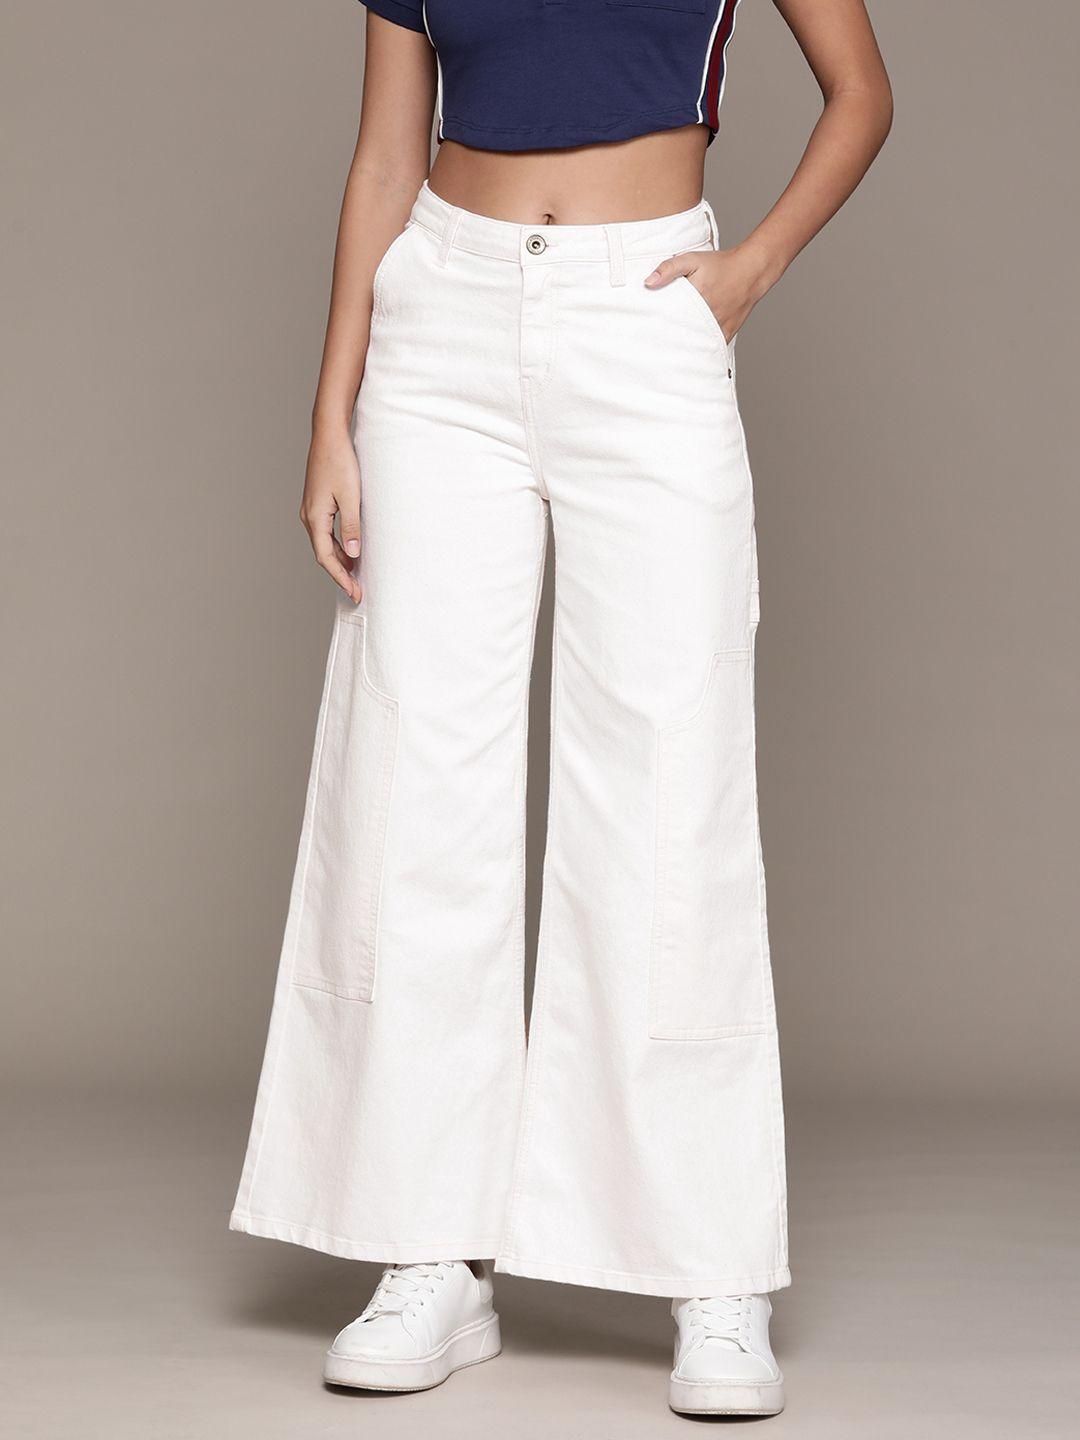 the-roadster-lifestyle-co.-women-wide-leg-high-rise-stretchable-jeans